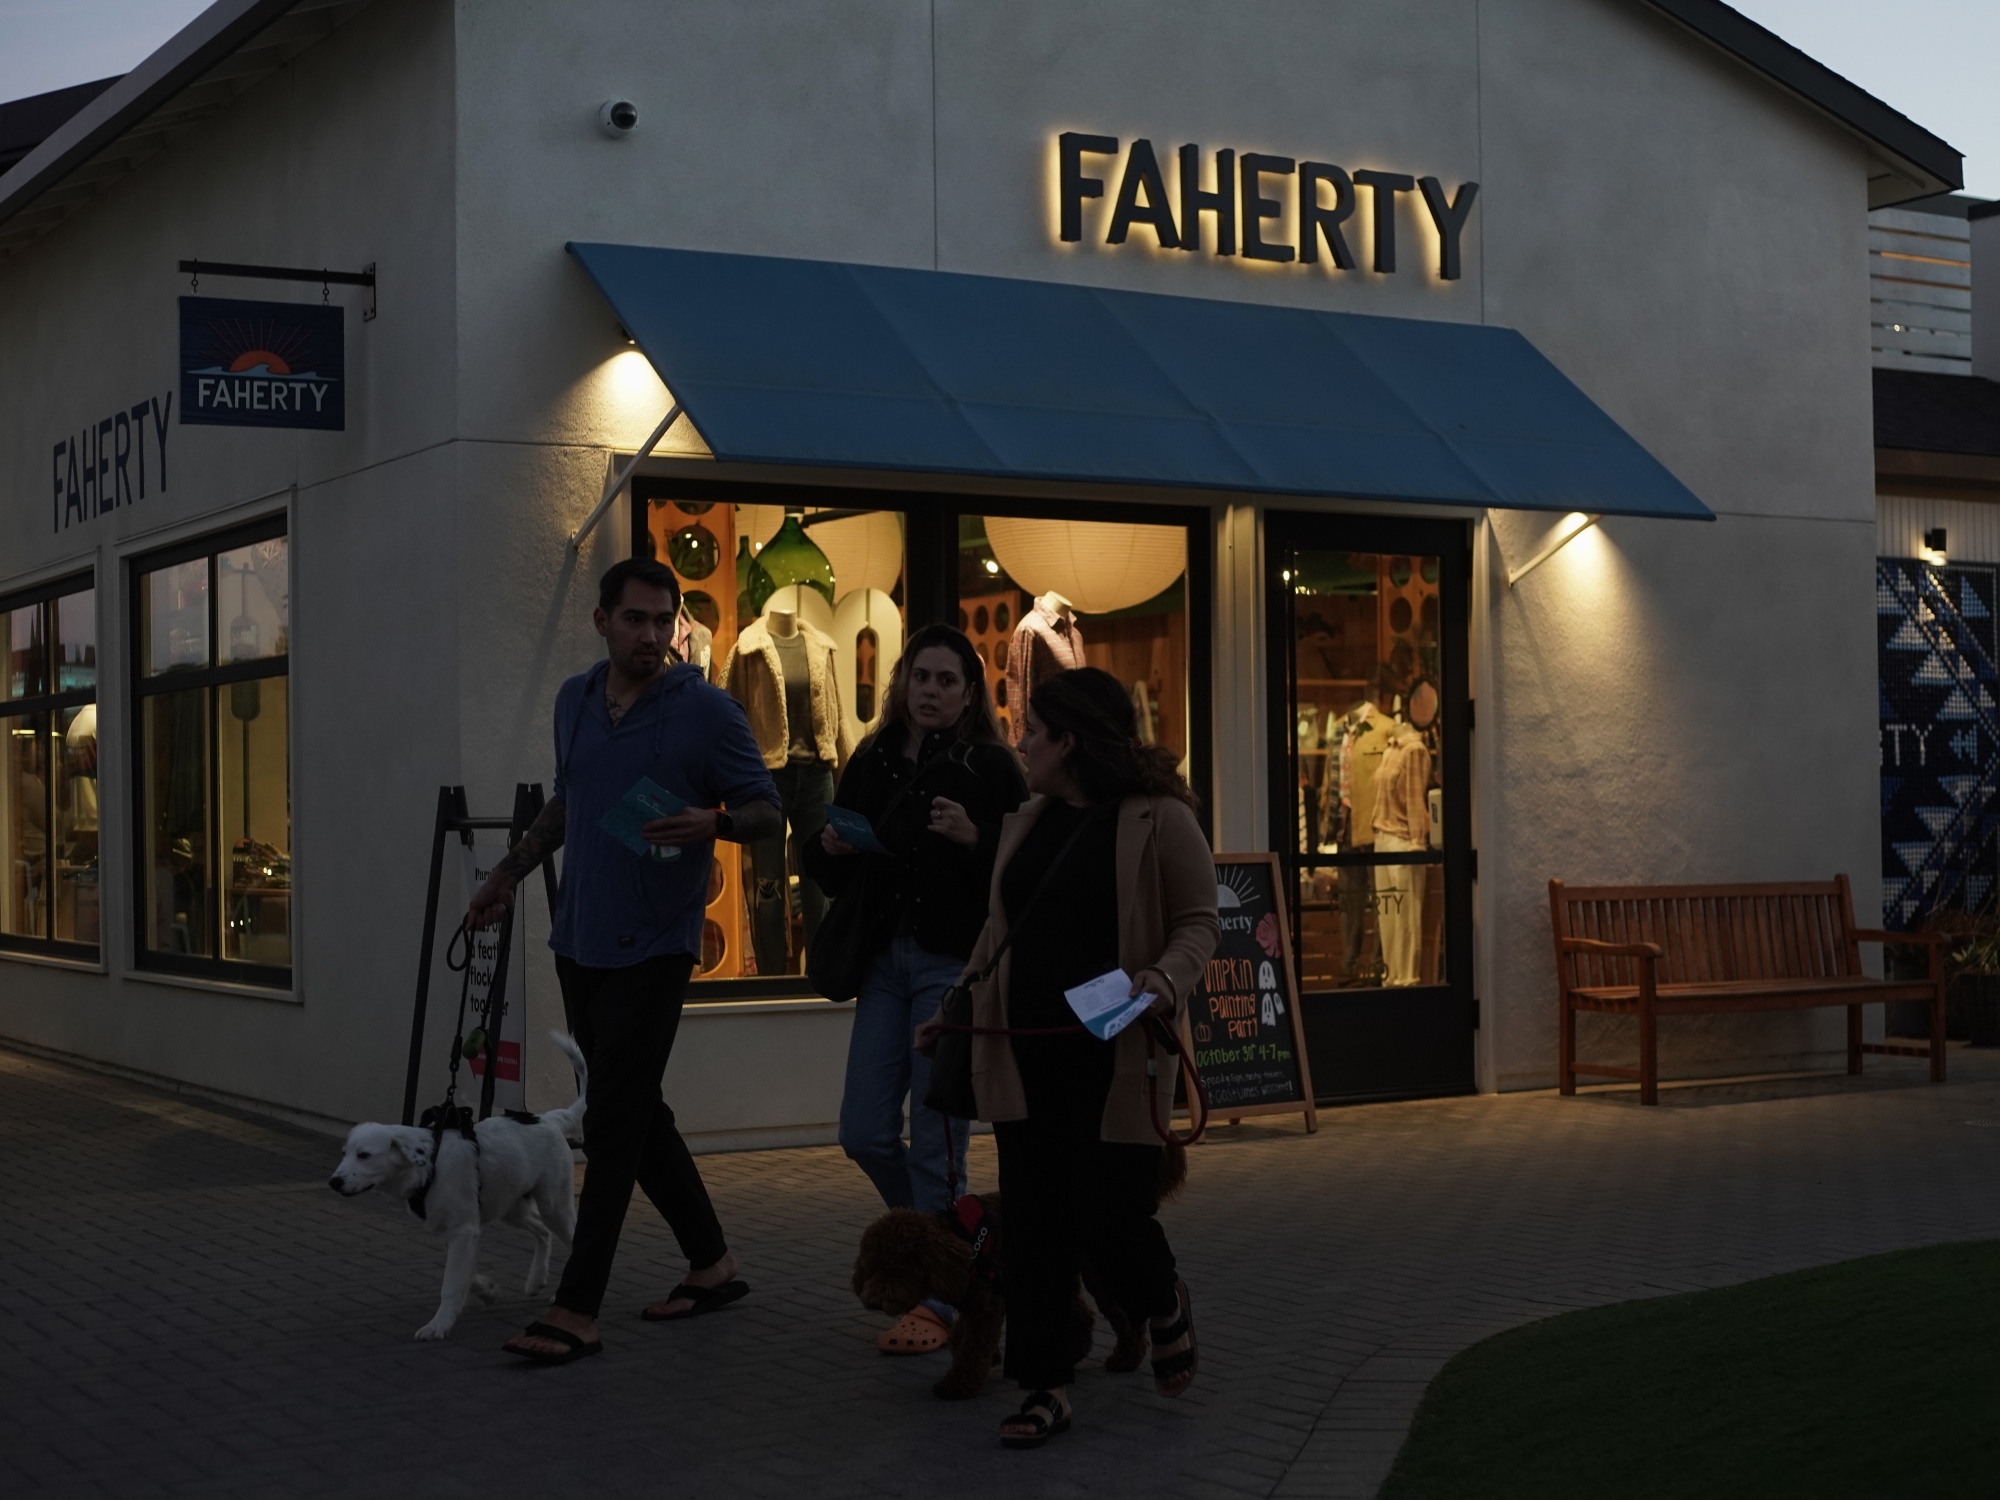 Apparel Maker Faherty Is Said to Explore Selling Minority Stake